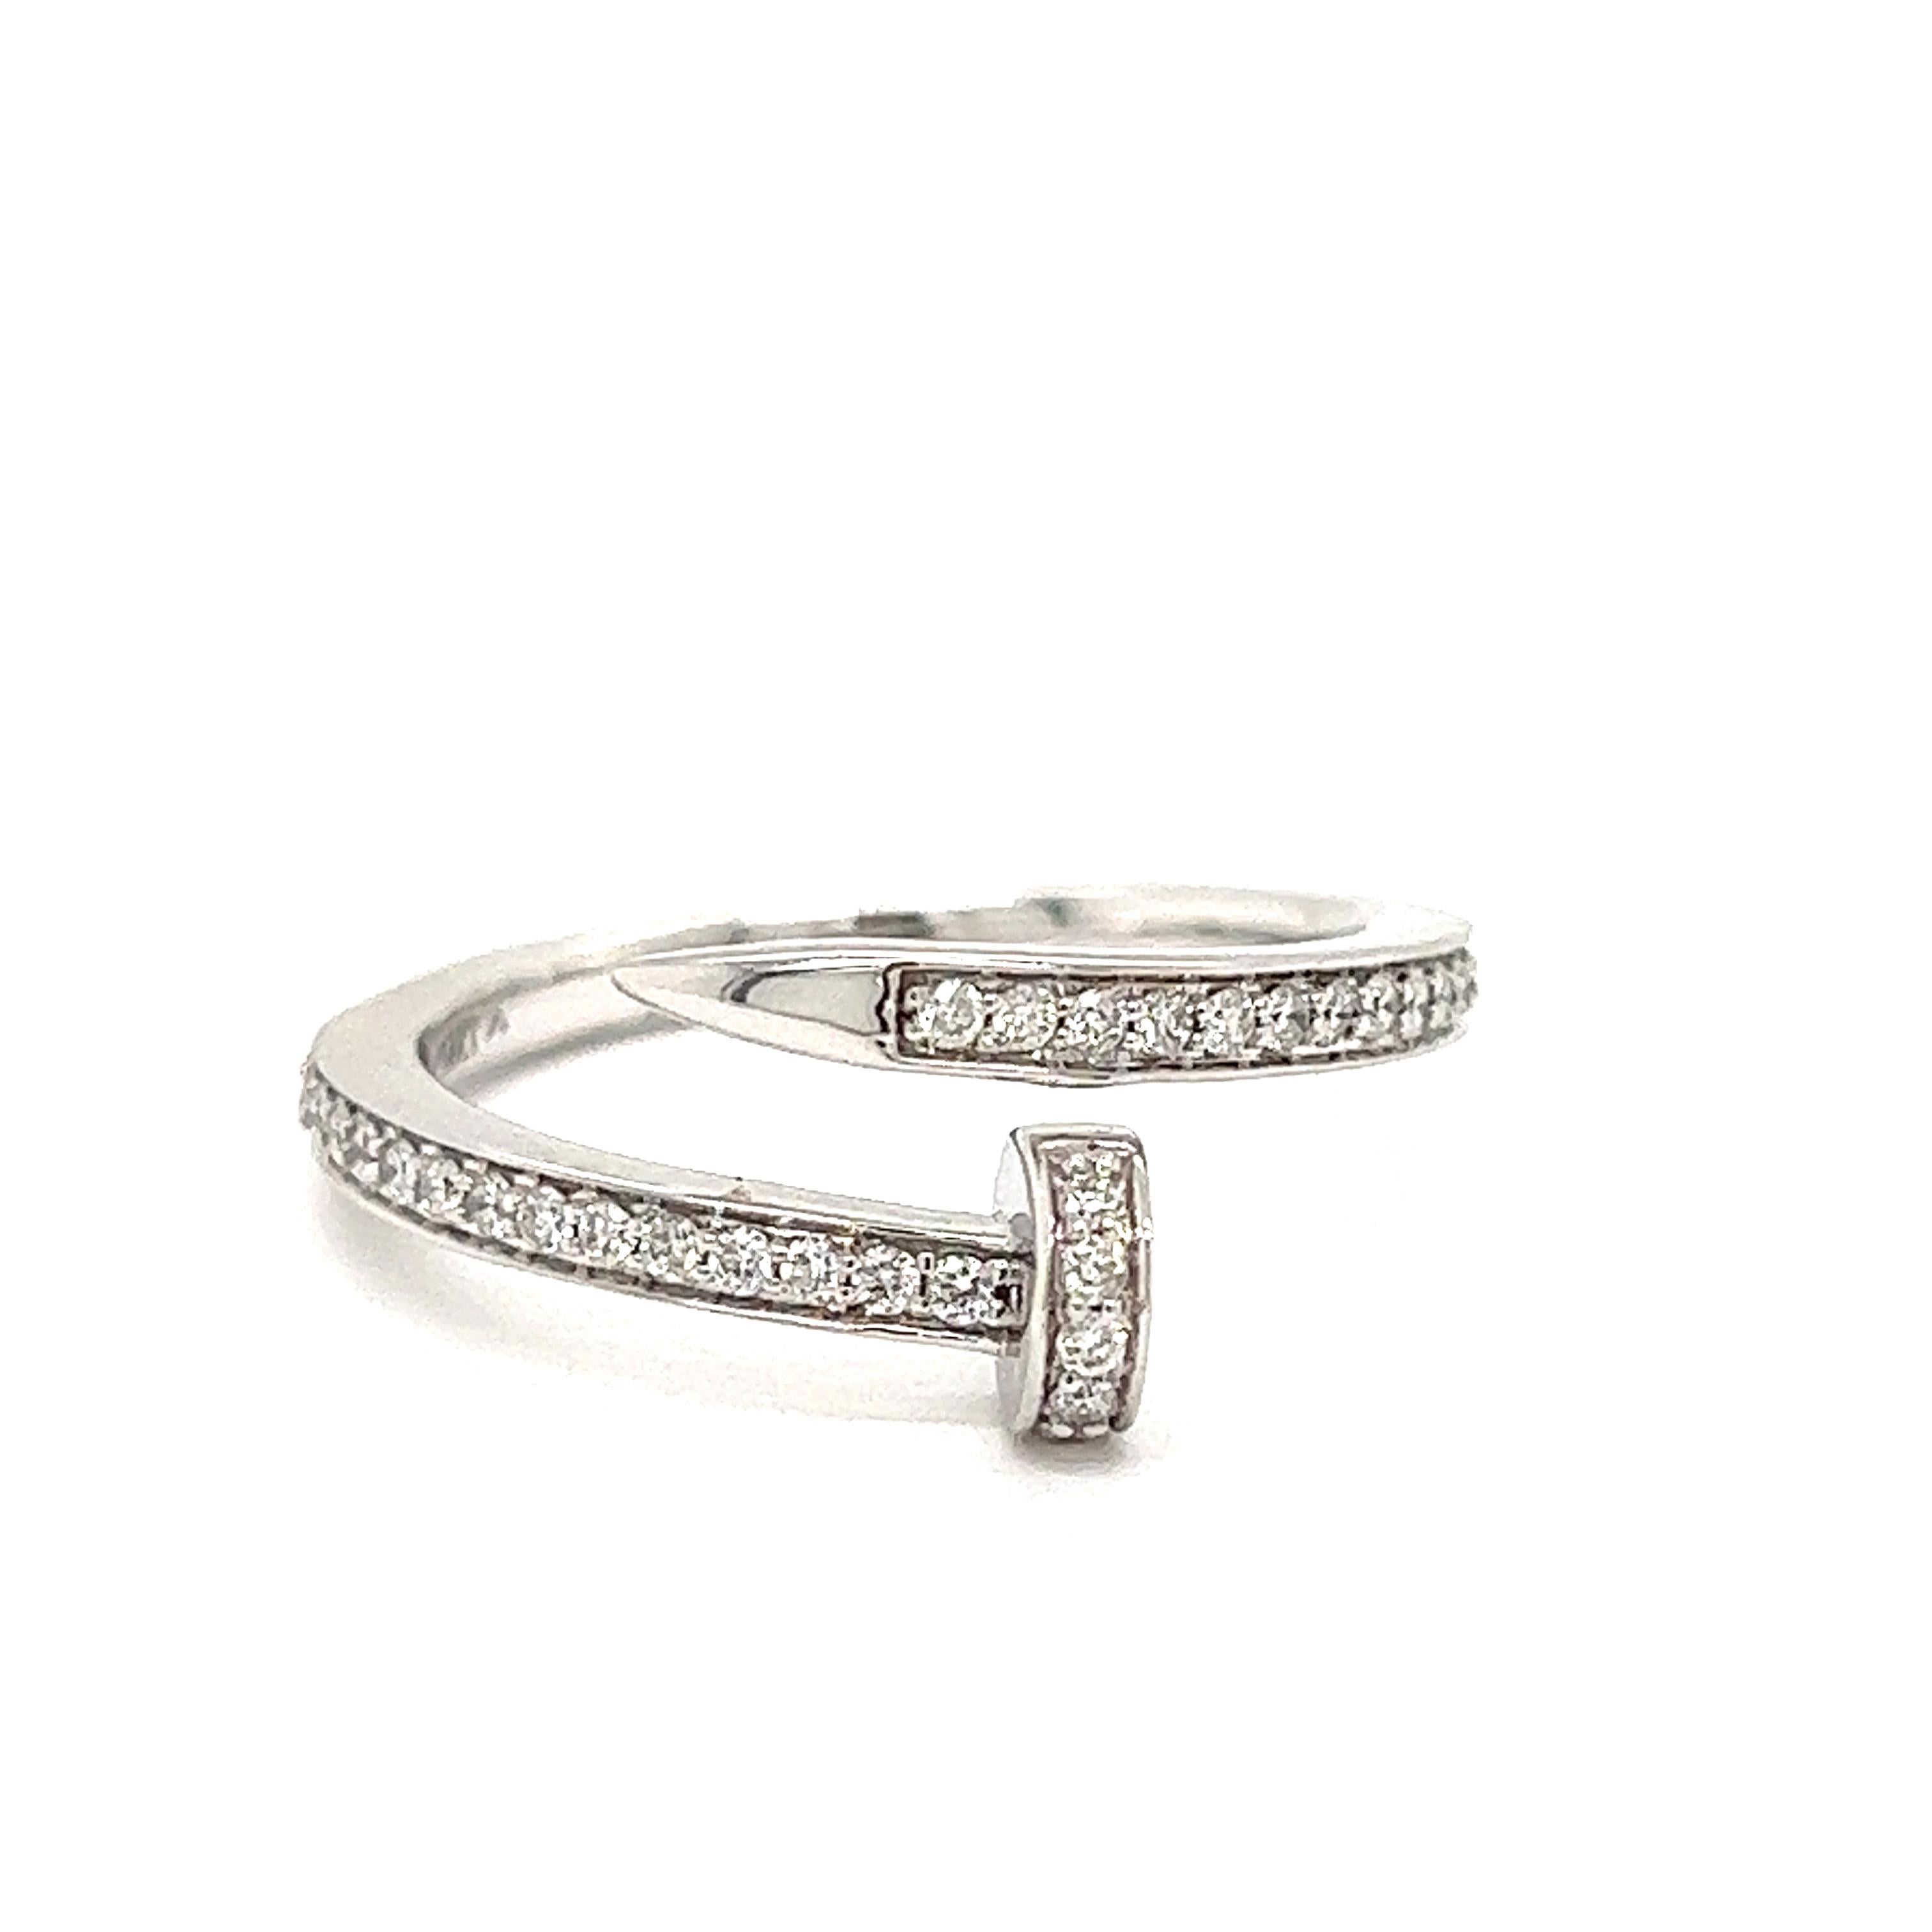 Iconic nail design, this sweet ring is .30 cttw in SI clarity, G-H color diamonds.  The 14 kt white gold ring has a smooth finish and is three grams of gold.

The perfect holiday gift, she will say 